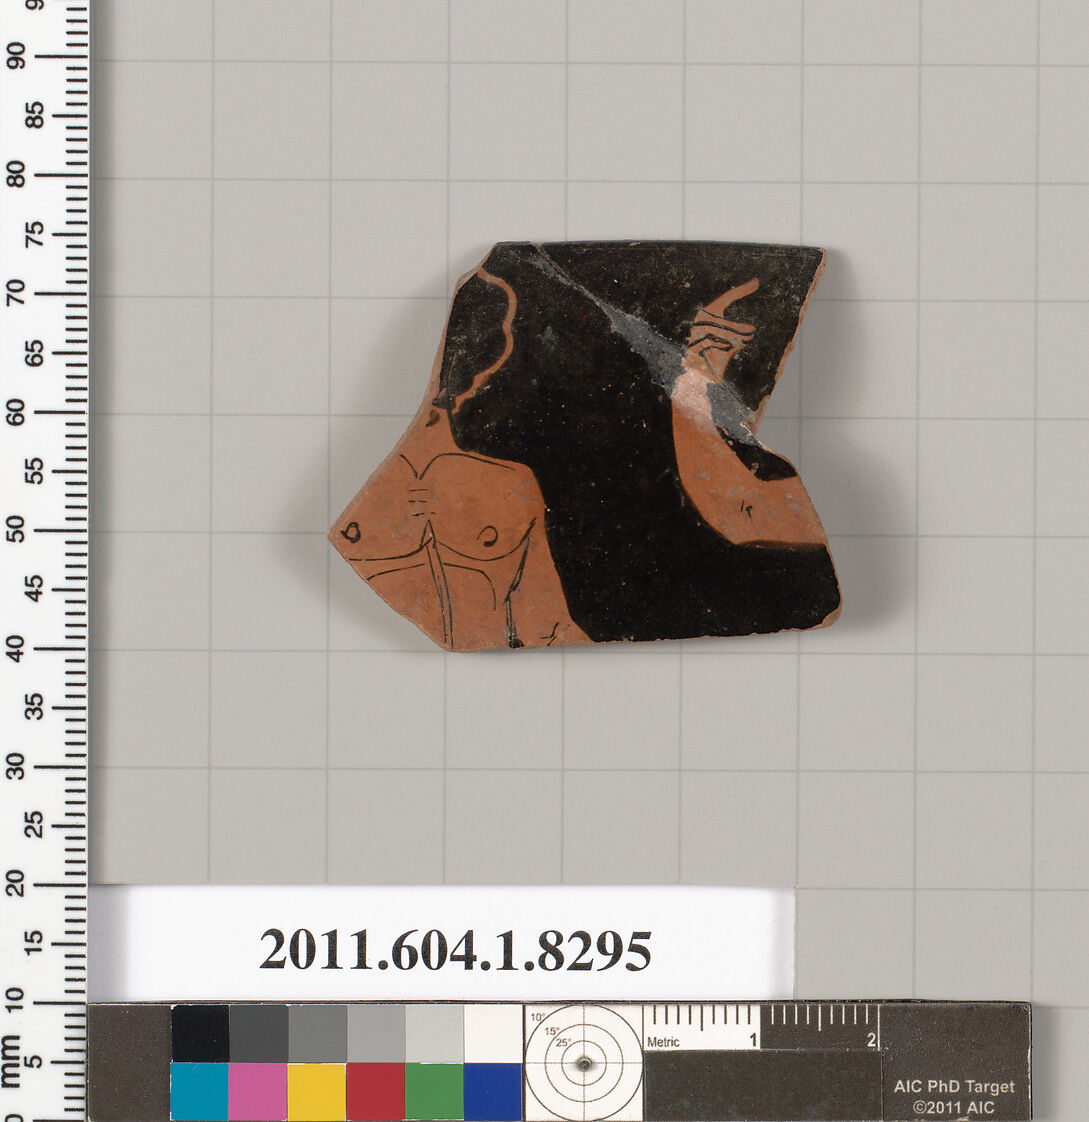 Terracotta rim fragment of a kylix (drinking cup), Attributed to the Painter of London E 106 [DvB], Terracotta, Greek, Attic 